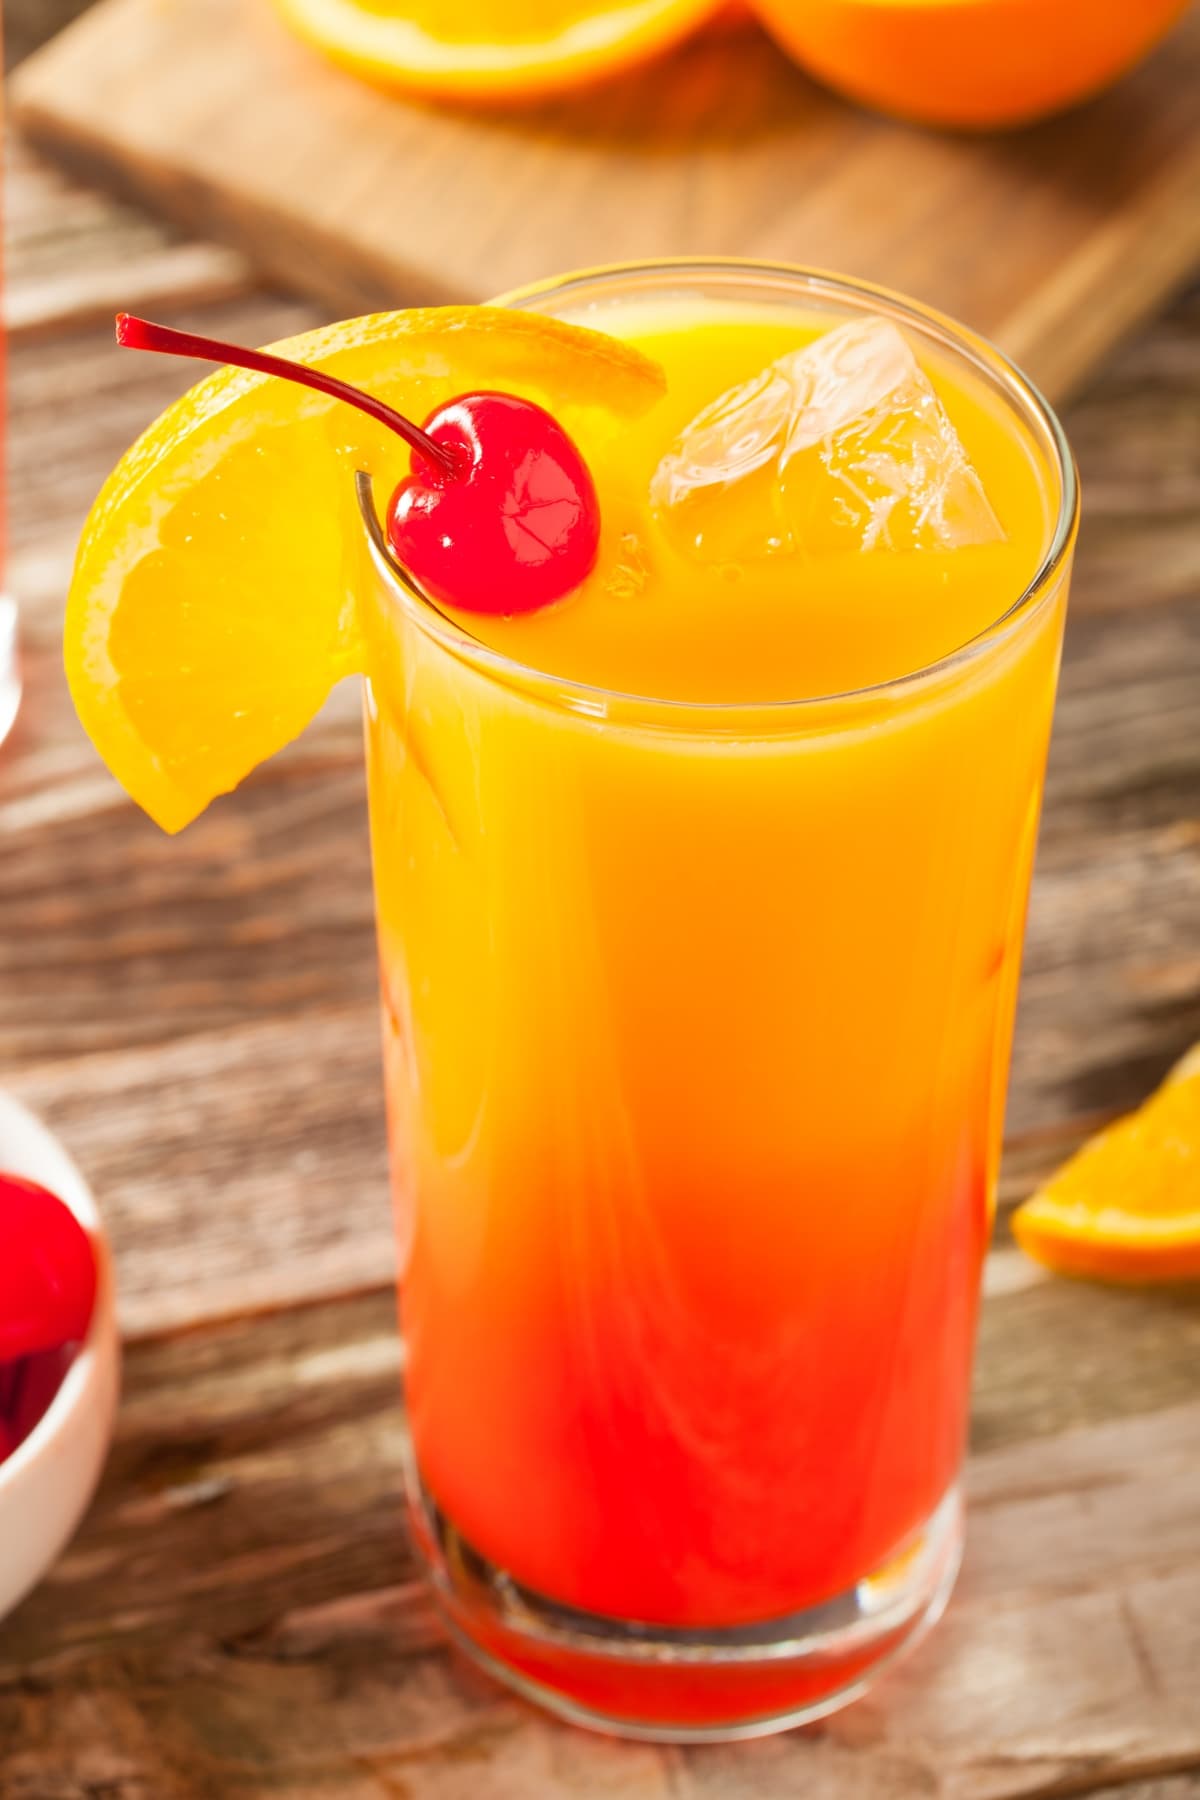 Homemade Tequila Sunrise with Orange and Cherry